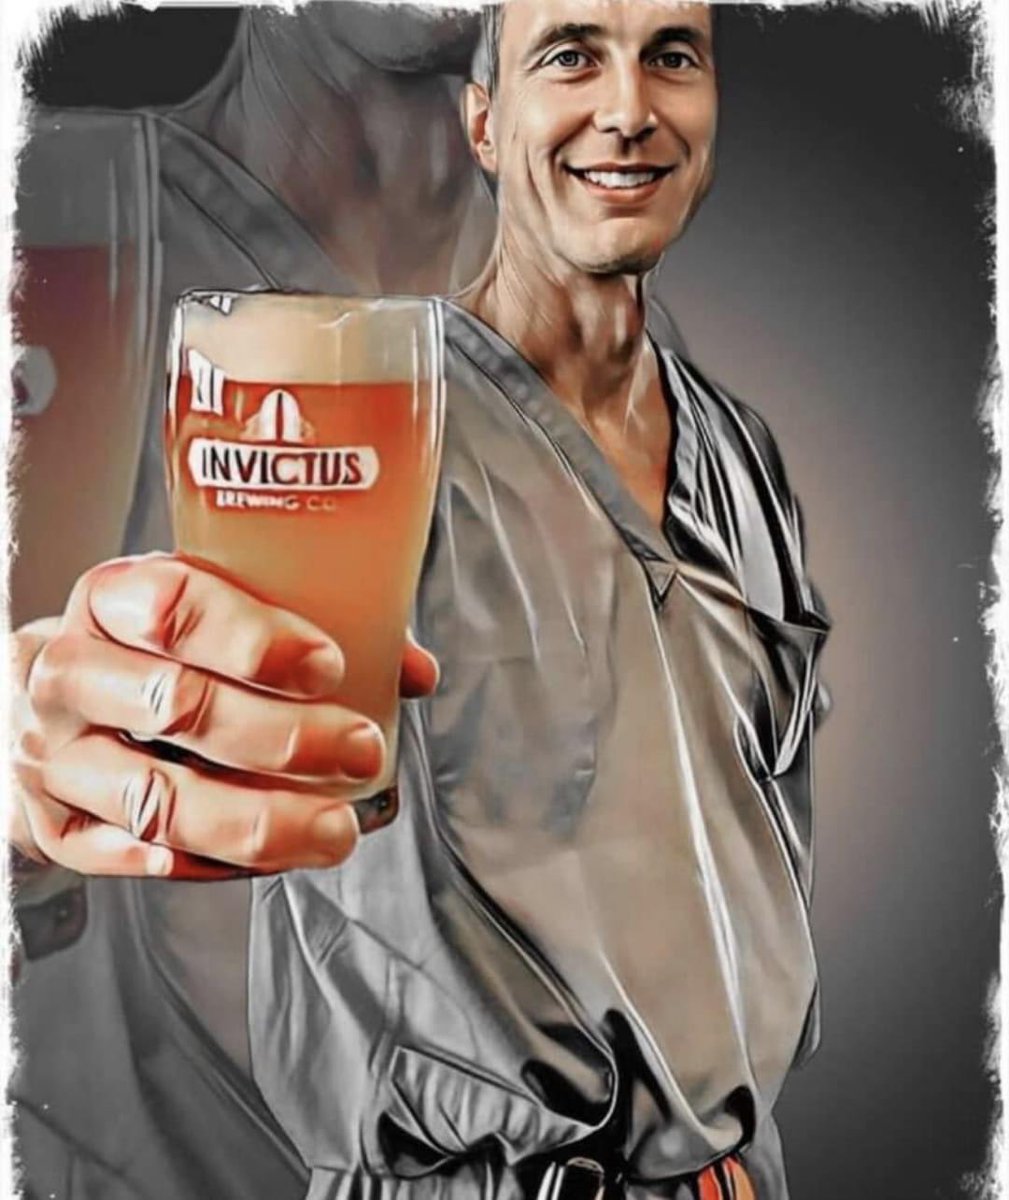 Now On Tap! Troy IPA 6.1% 72 IBUs Happy National Beer Day! 🍻 This beer was created in celebration of our favorite Orthopedic Surgeon and Invictus co-owner, Troy Wolter’s birthday.